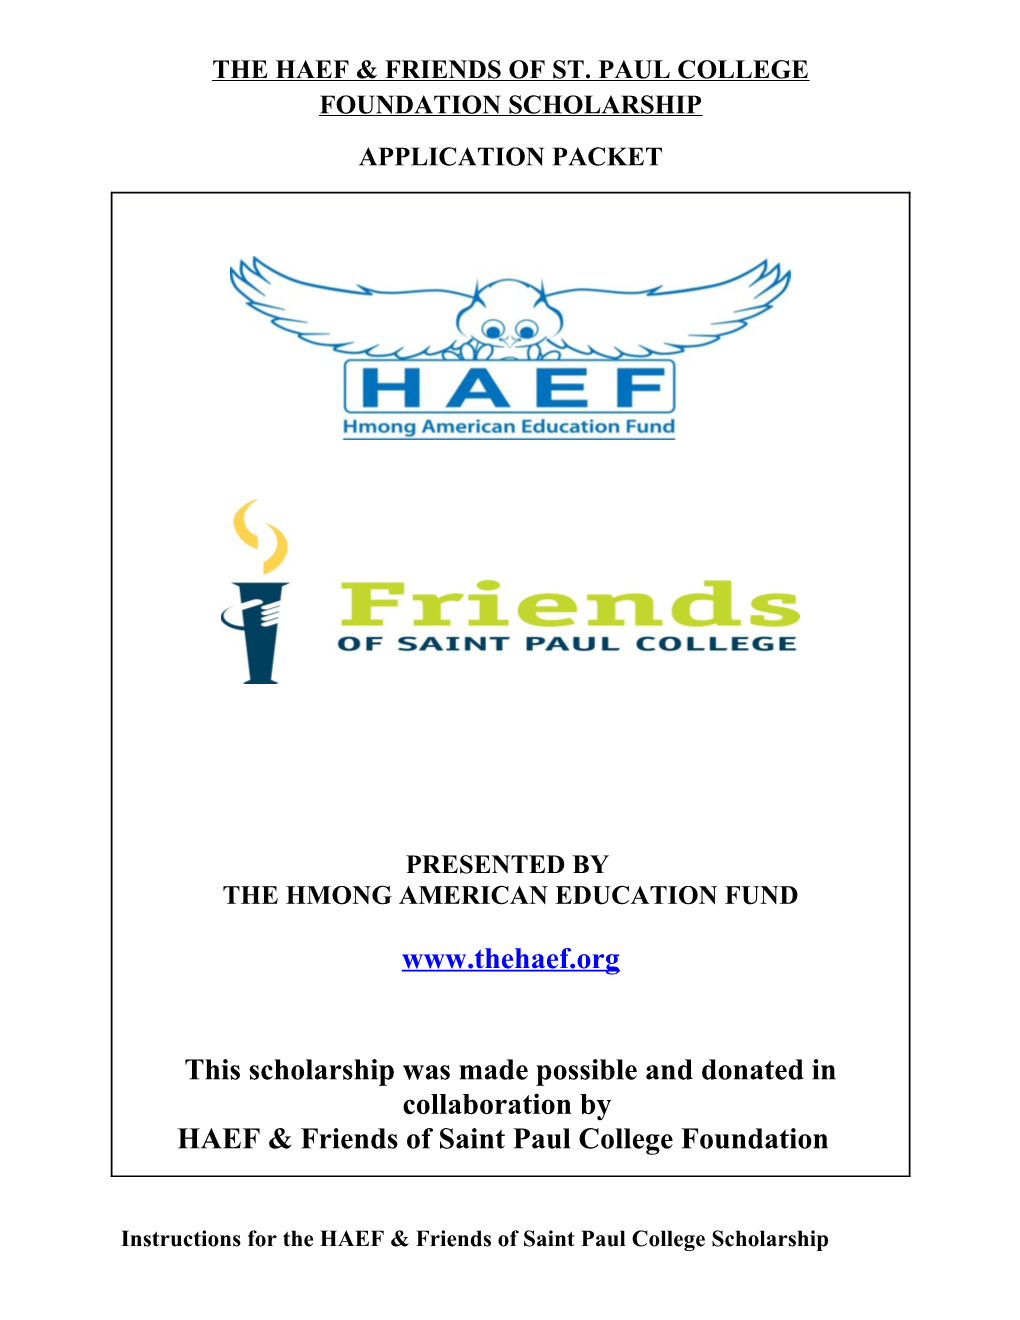 The Haef & Friends of St. Paul College Foundation Scholarship